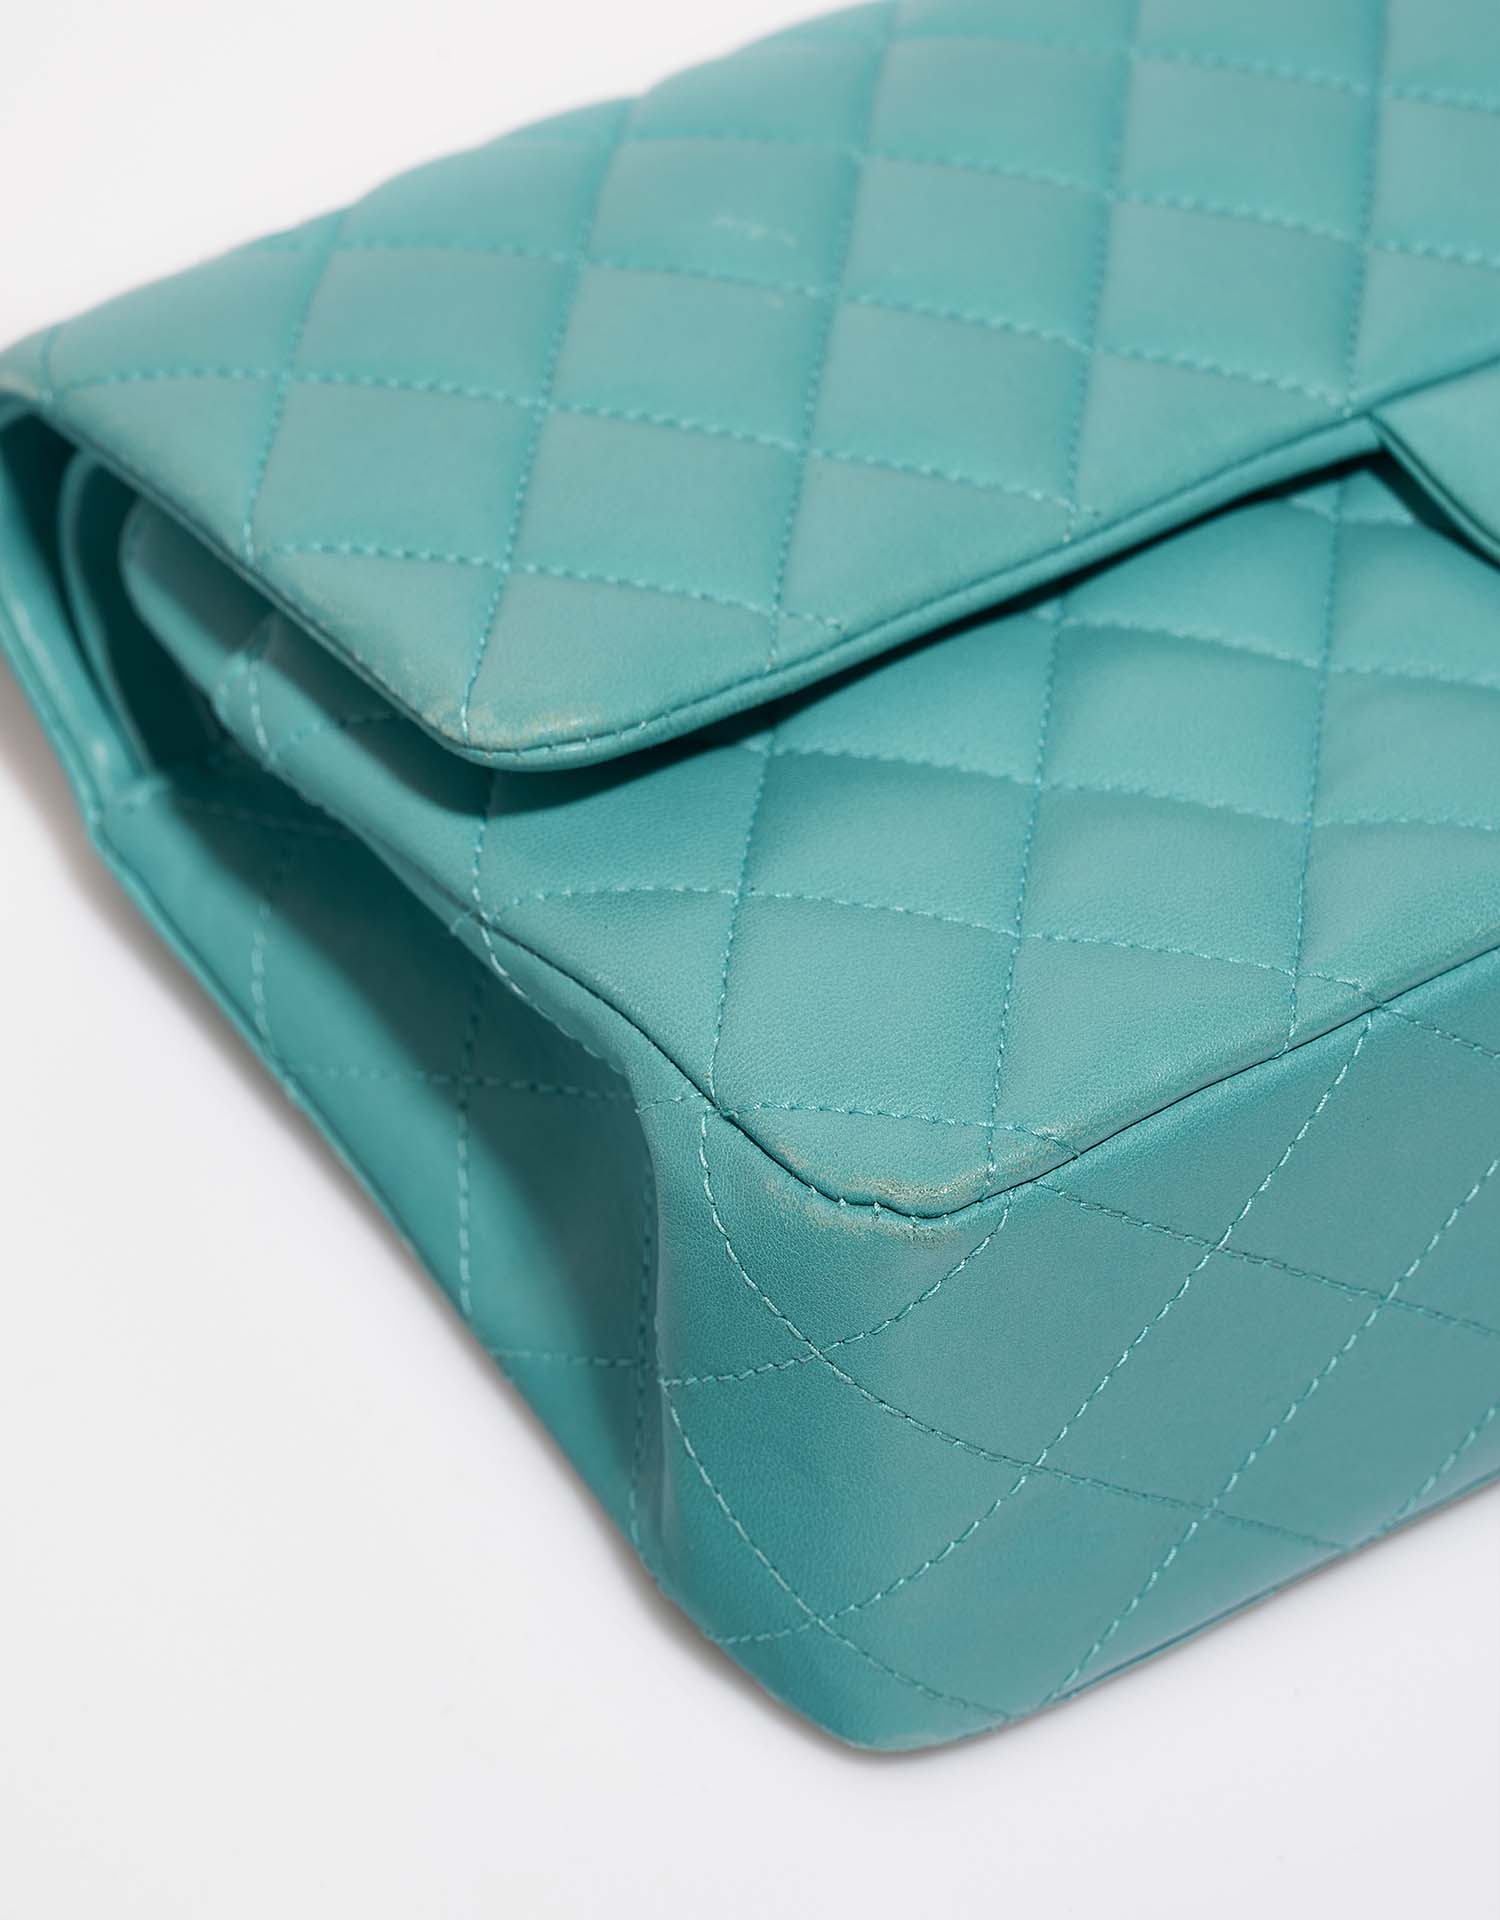 Chanel Timeless Medium Turquoise signs of wear| Sell your designer bag on Saclab.com